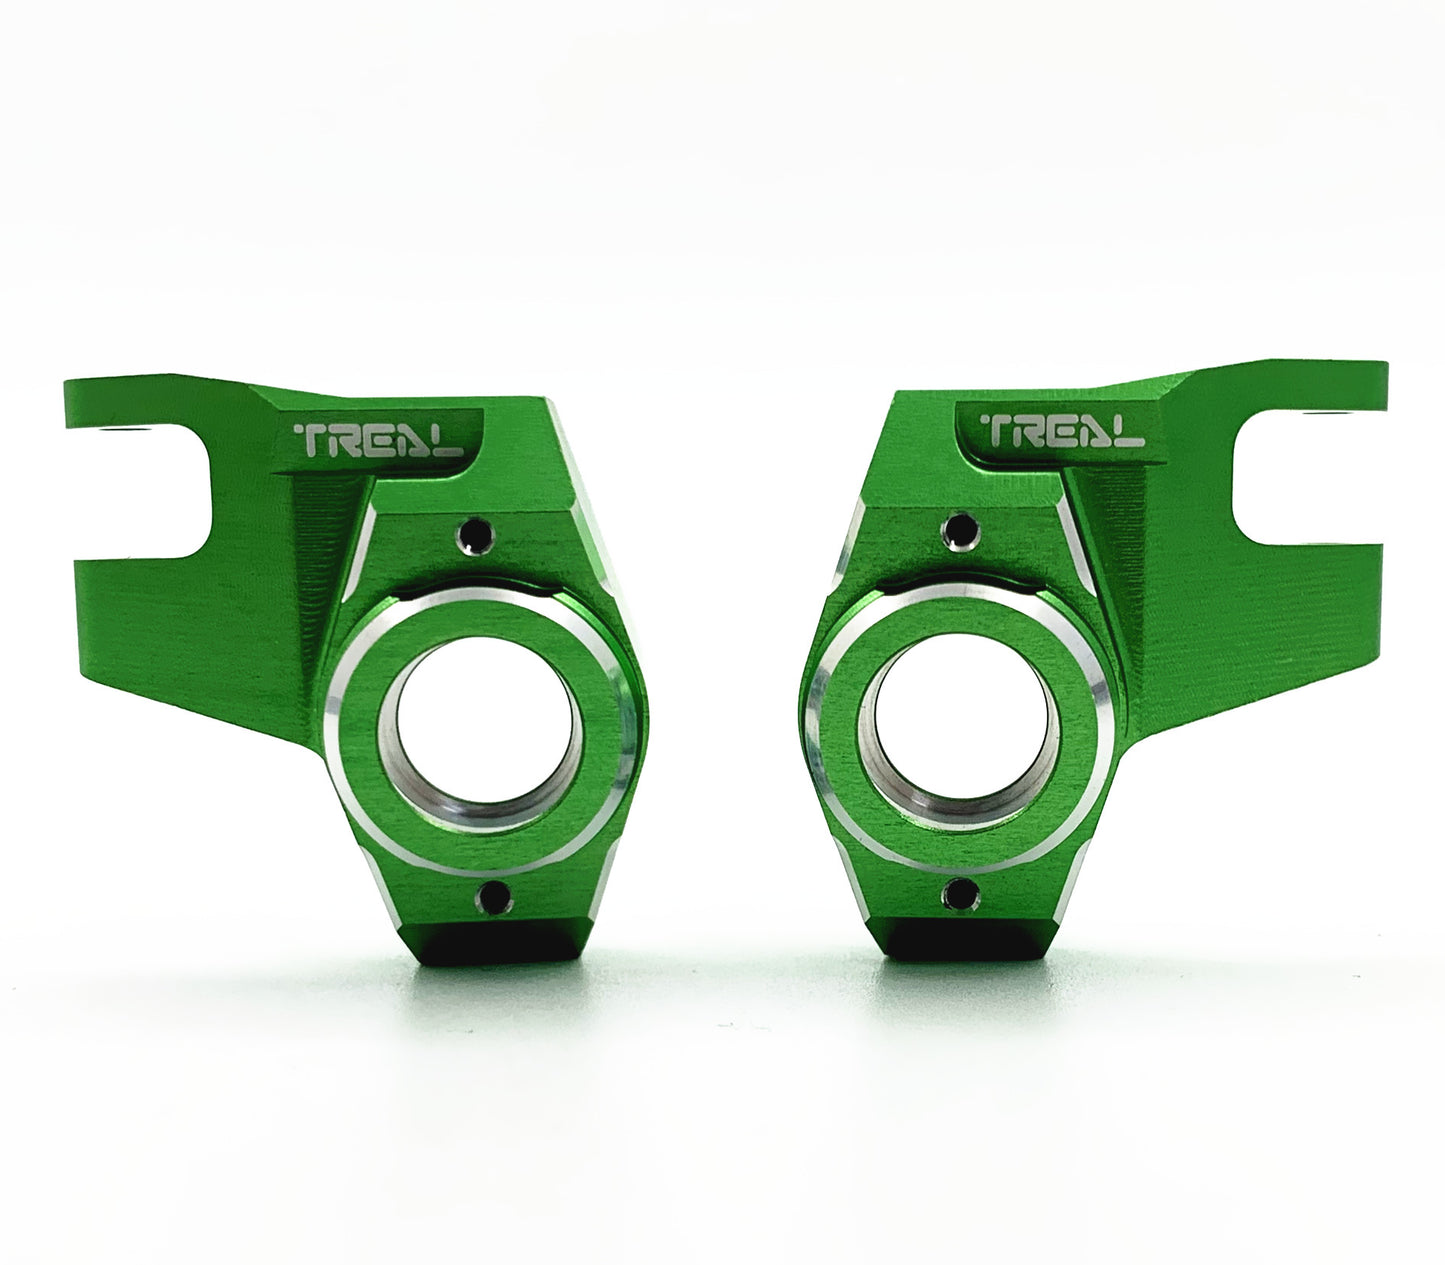 Treal Aluminum 7075 Front Steering Knuckles for SCX10 III Ford Bronco Front Straight Axle